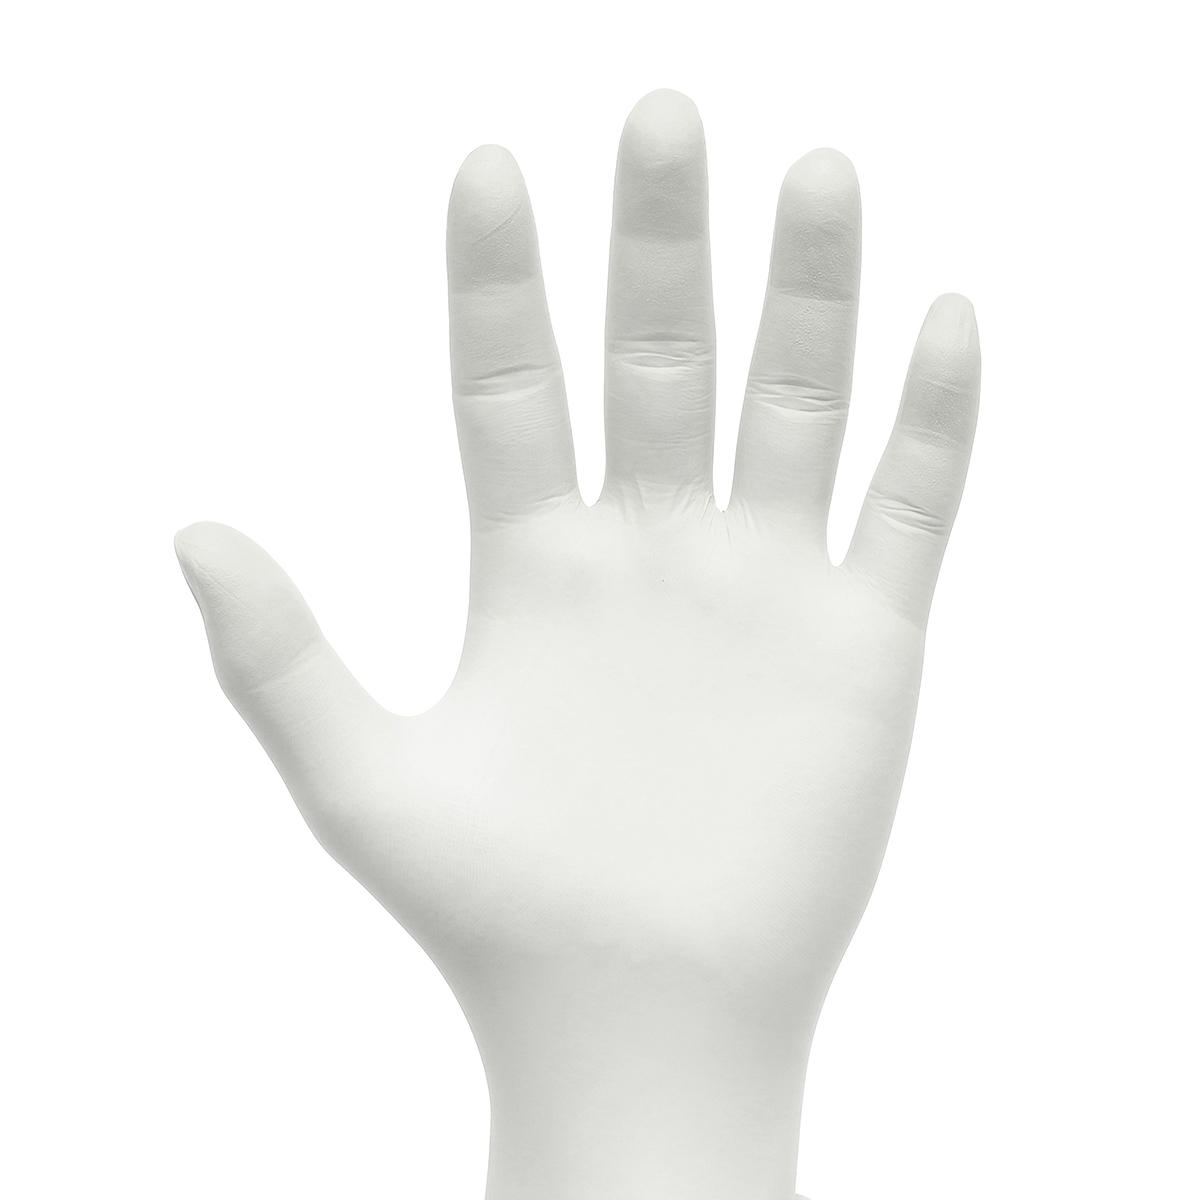 100-pcs-White-Thickness-Disposable-Nitrile-Latex-Gloves-Waterproof-Kitchen-Safety-Food-Prep-Cooking--1654524-5